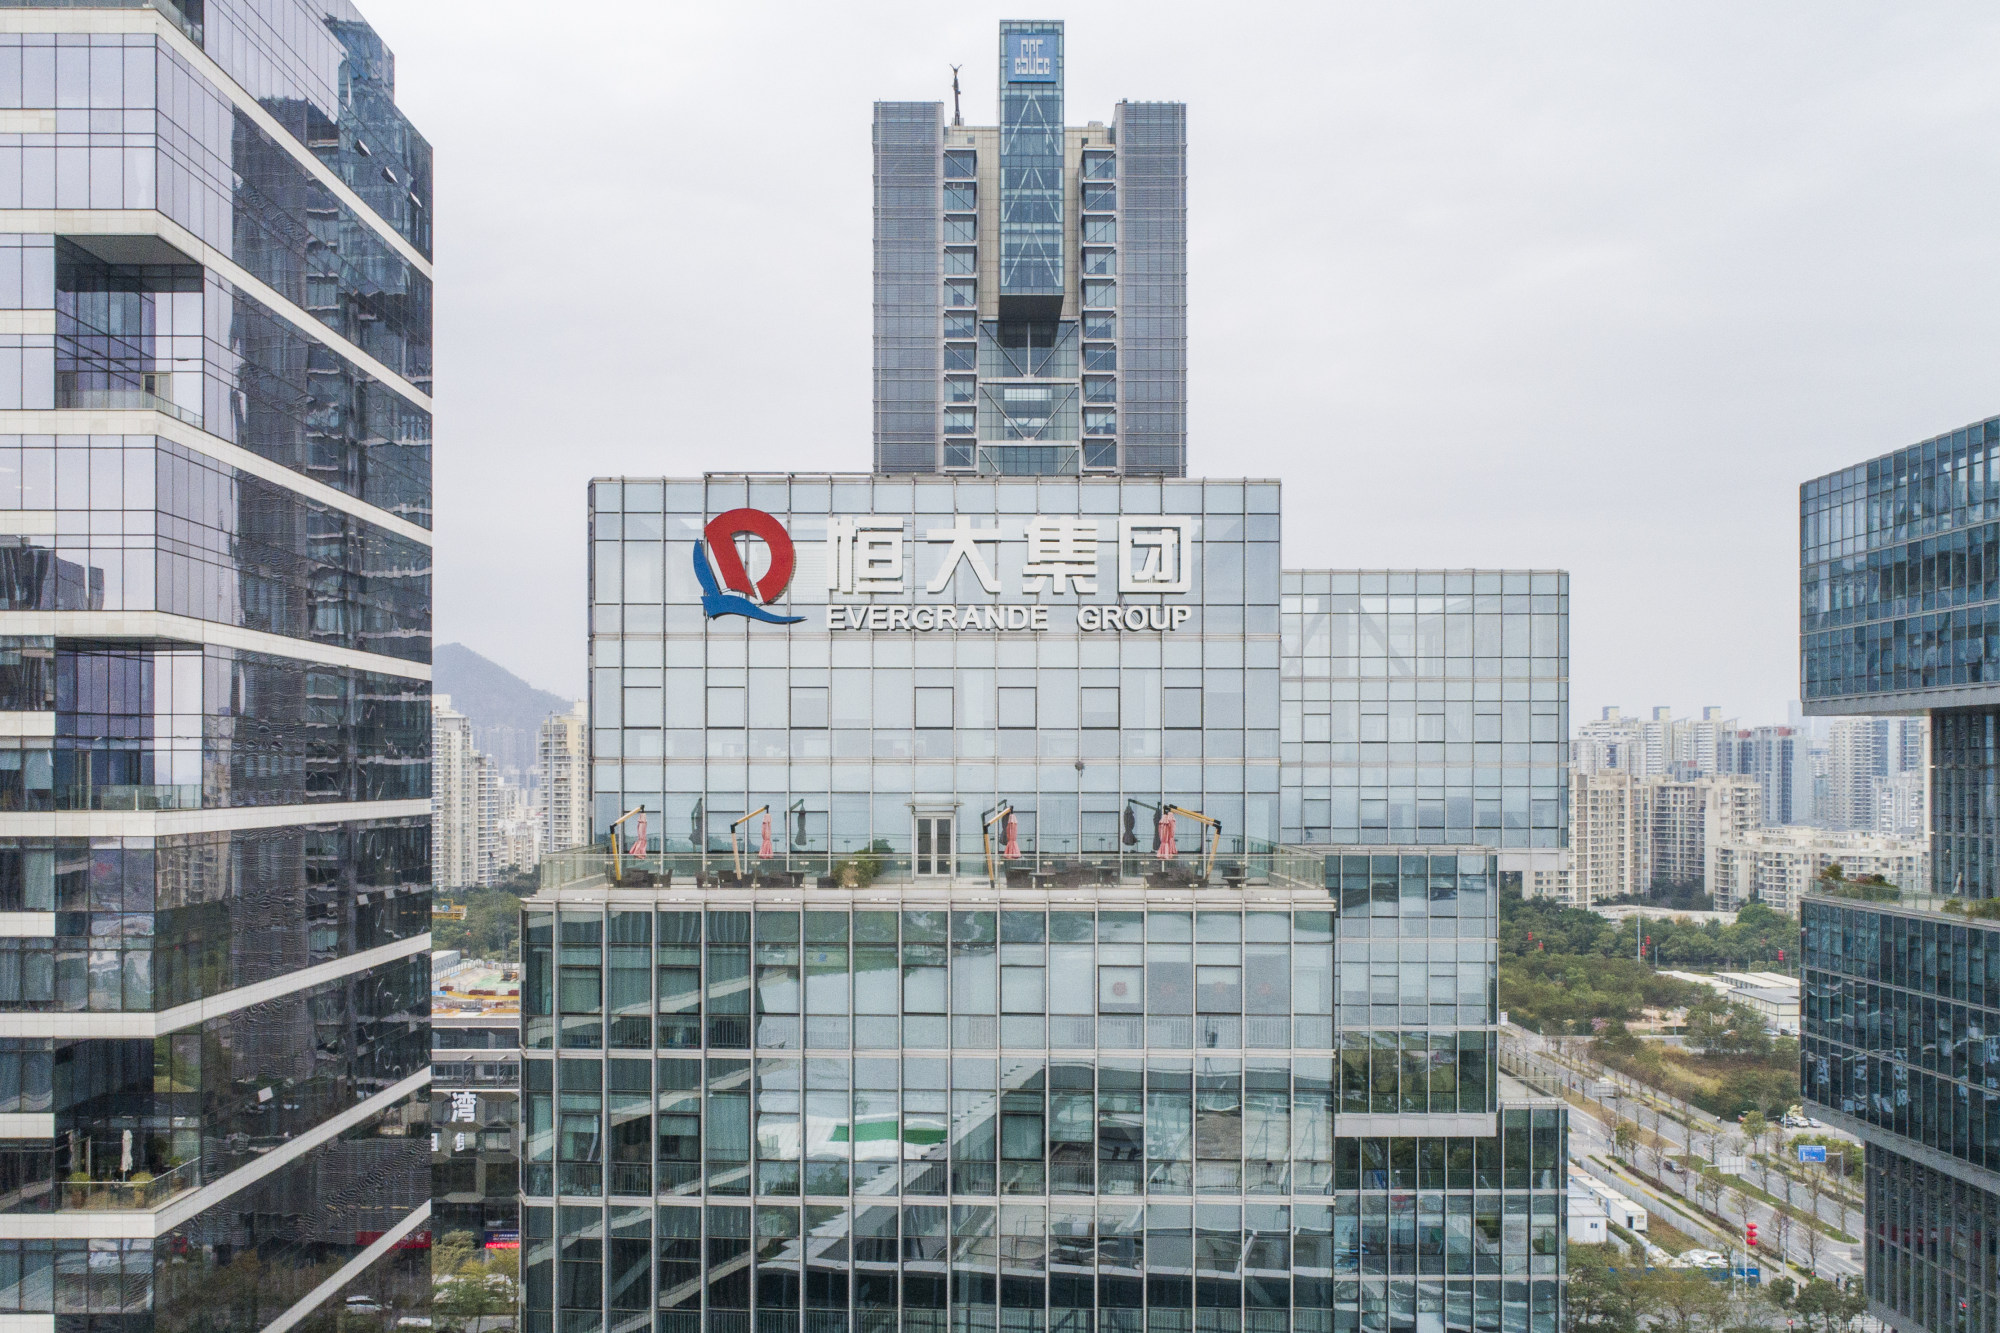 The logo of China Evergrande Group is seen on the facade of its headquarters in Shenzhen, in southern Guangdong province, on February 9, 2021. Photo: VCG via Getty Images